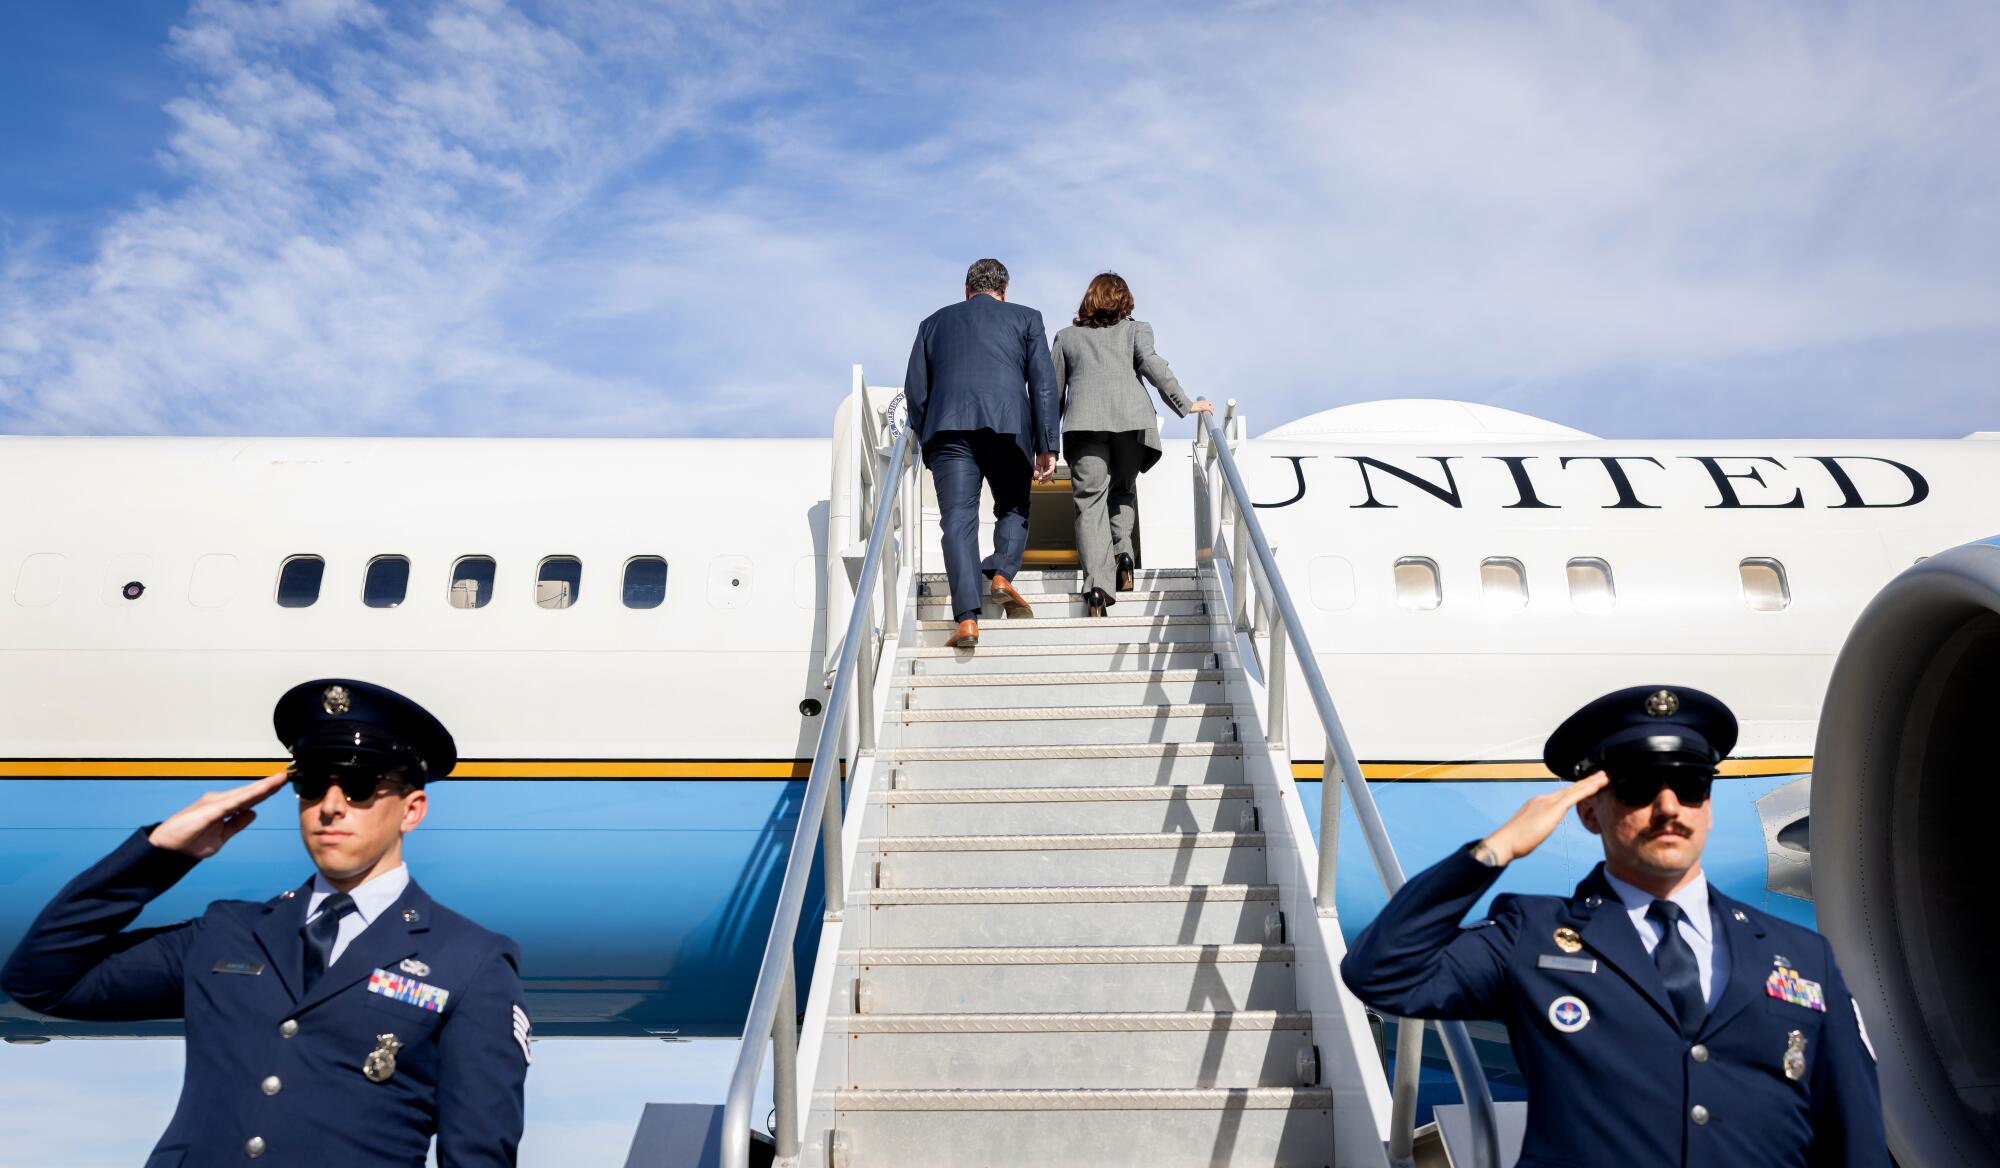 Vice President Kamala Harris and Second Gentleman Doug Emhoff board Air Force Two as two military members salute.